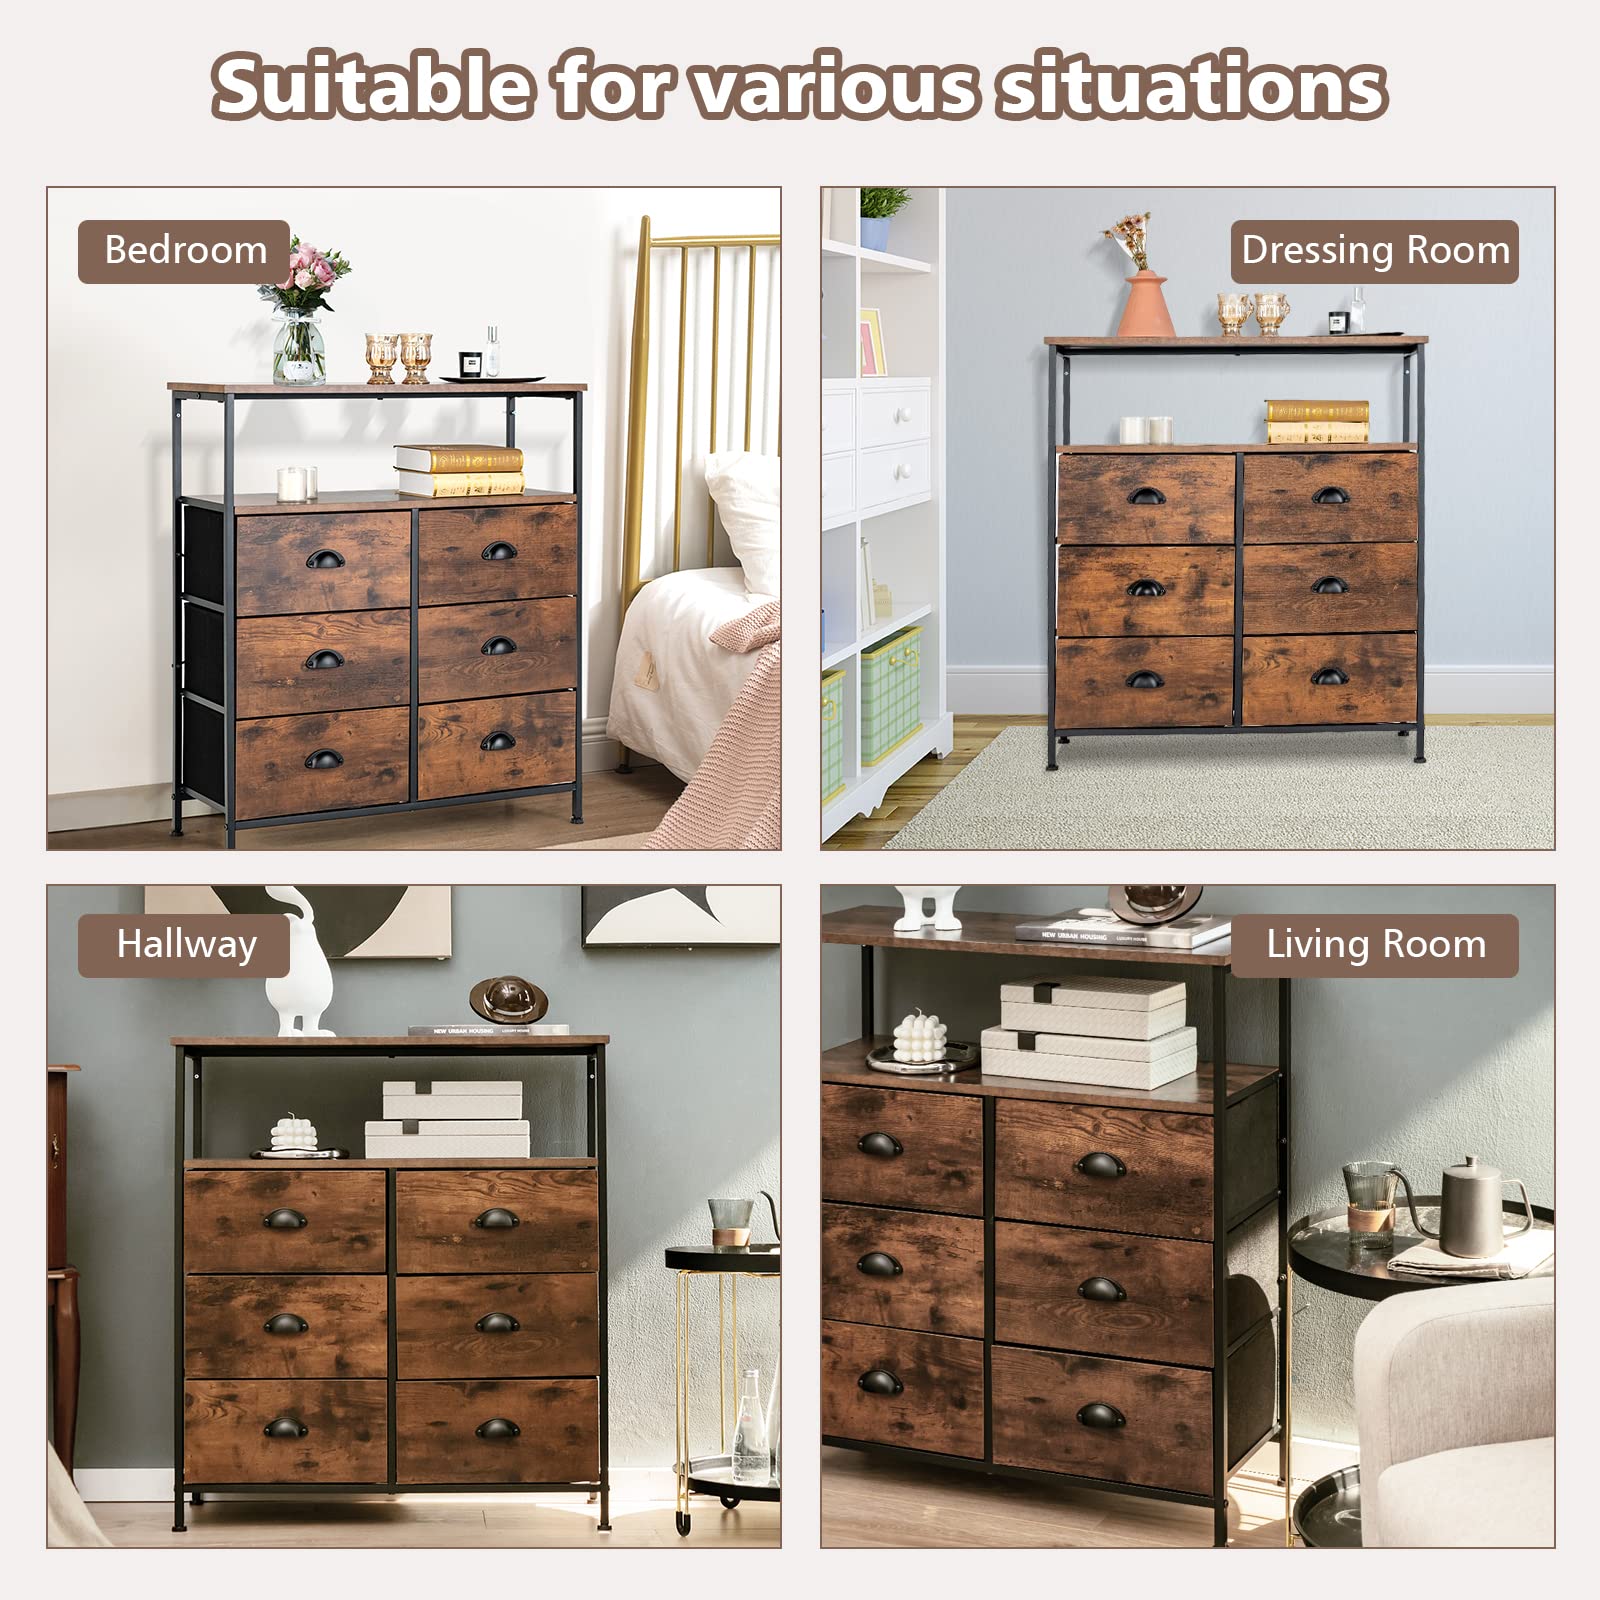 Giantex Fabric Dresser for Bedroom - Wide Storage Tower Chest of 6 Drawers